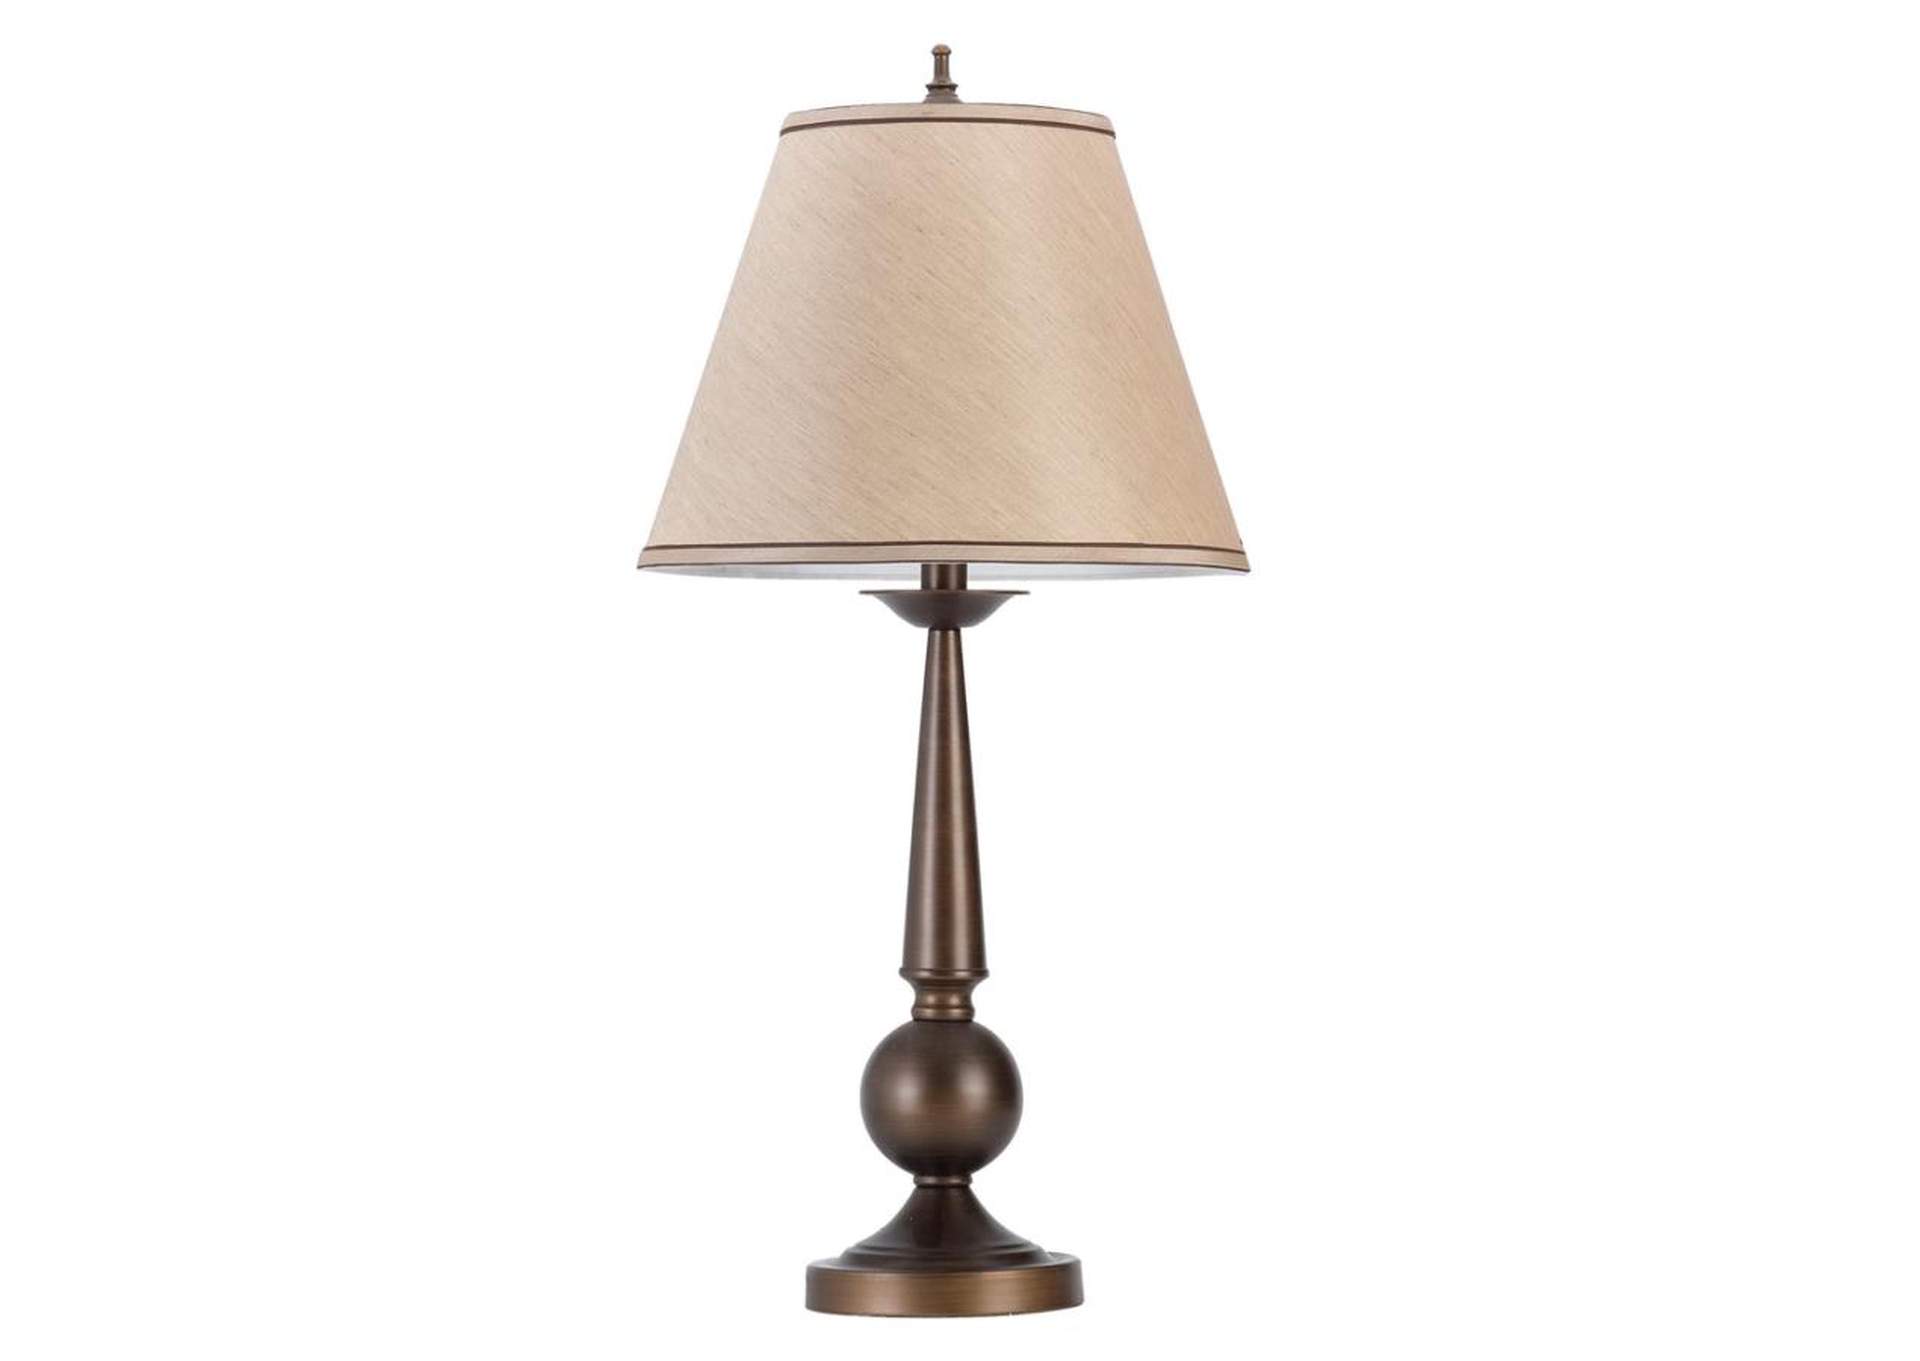 Ochanko Cone Shade Table Lamps Bronze And Beige (Set Of 2),Coaster Furniture